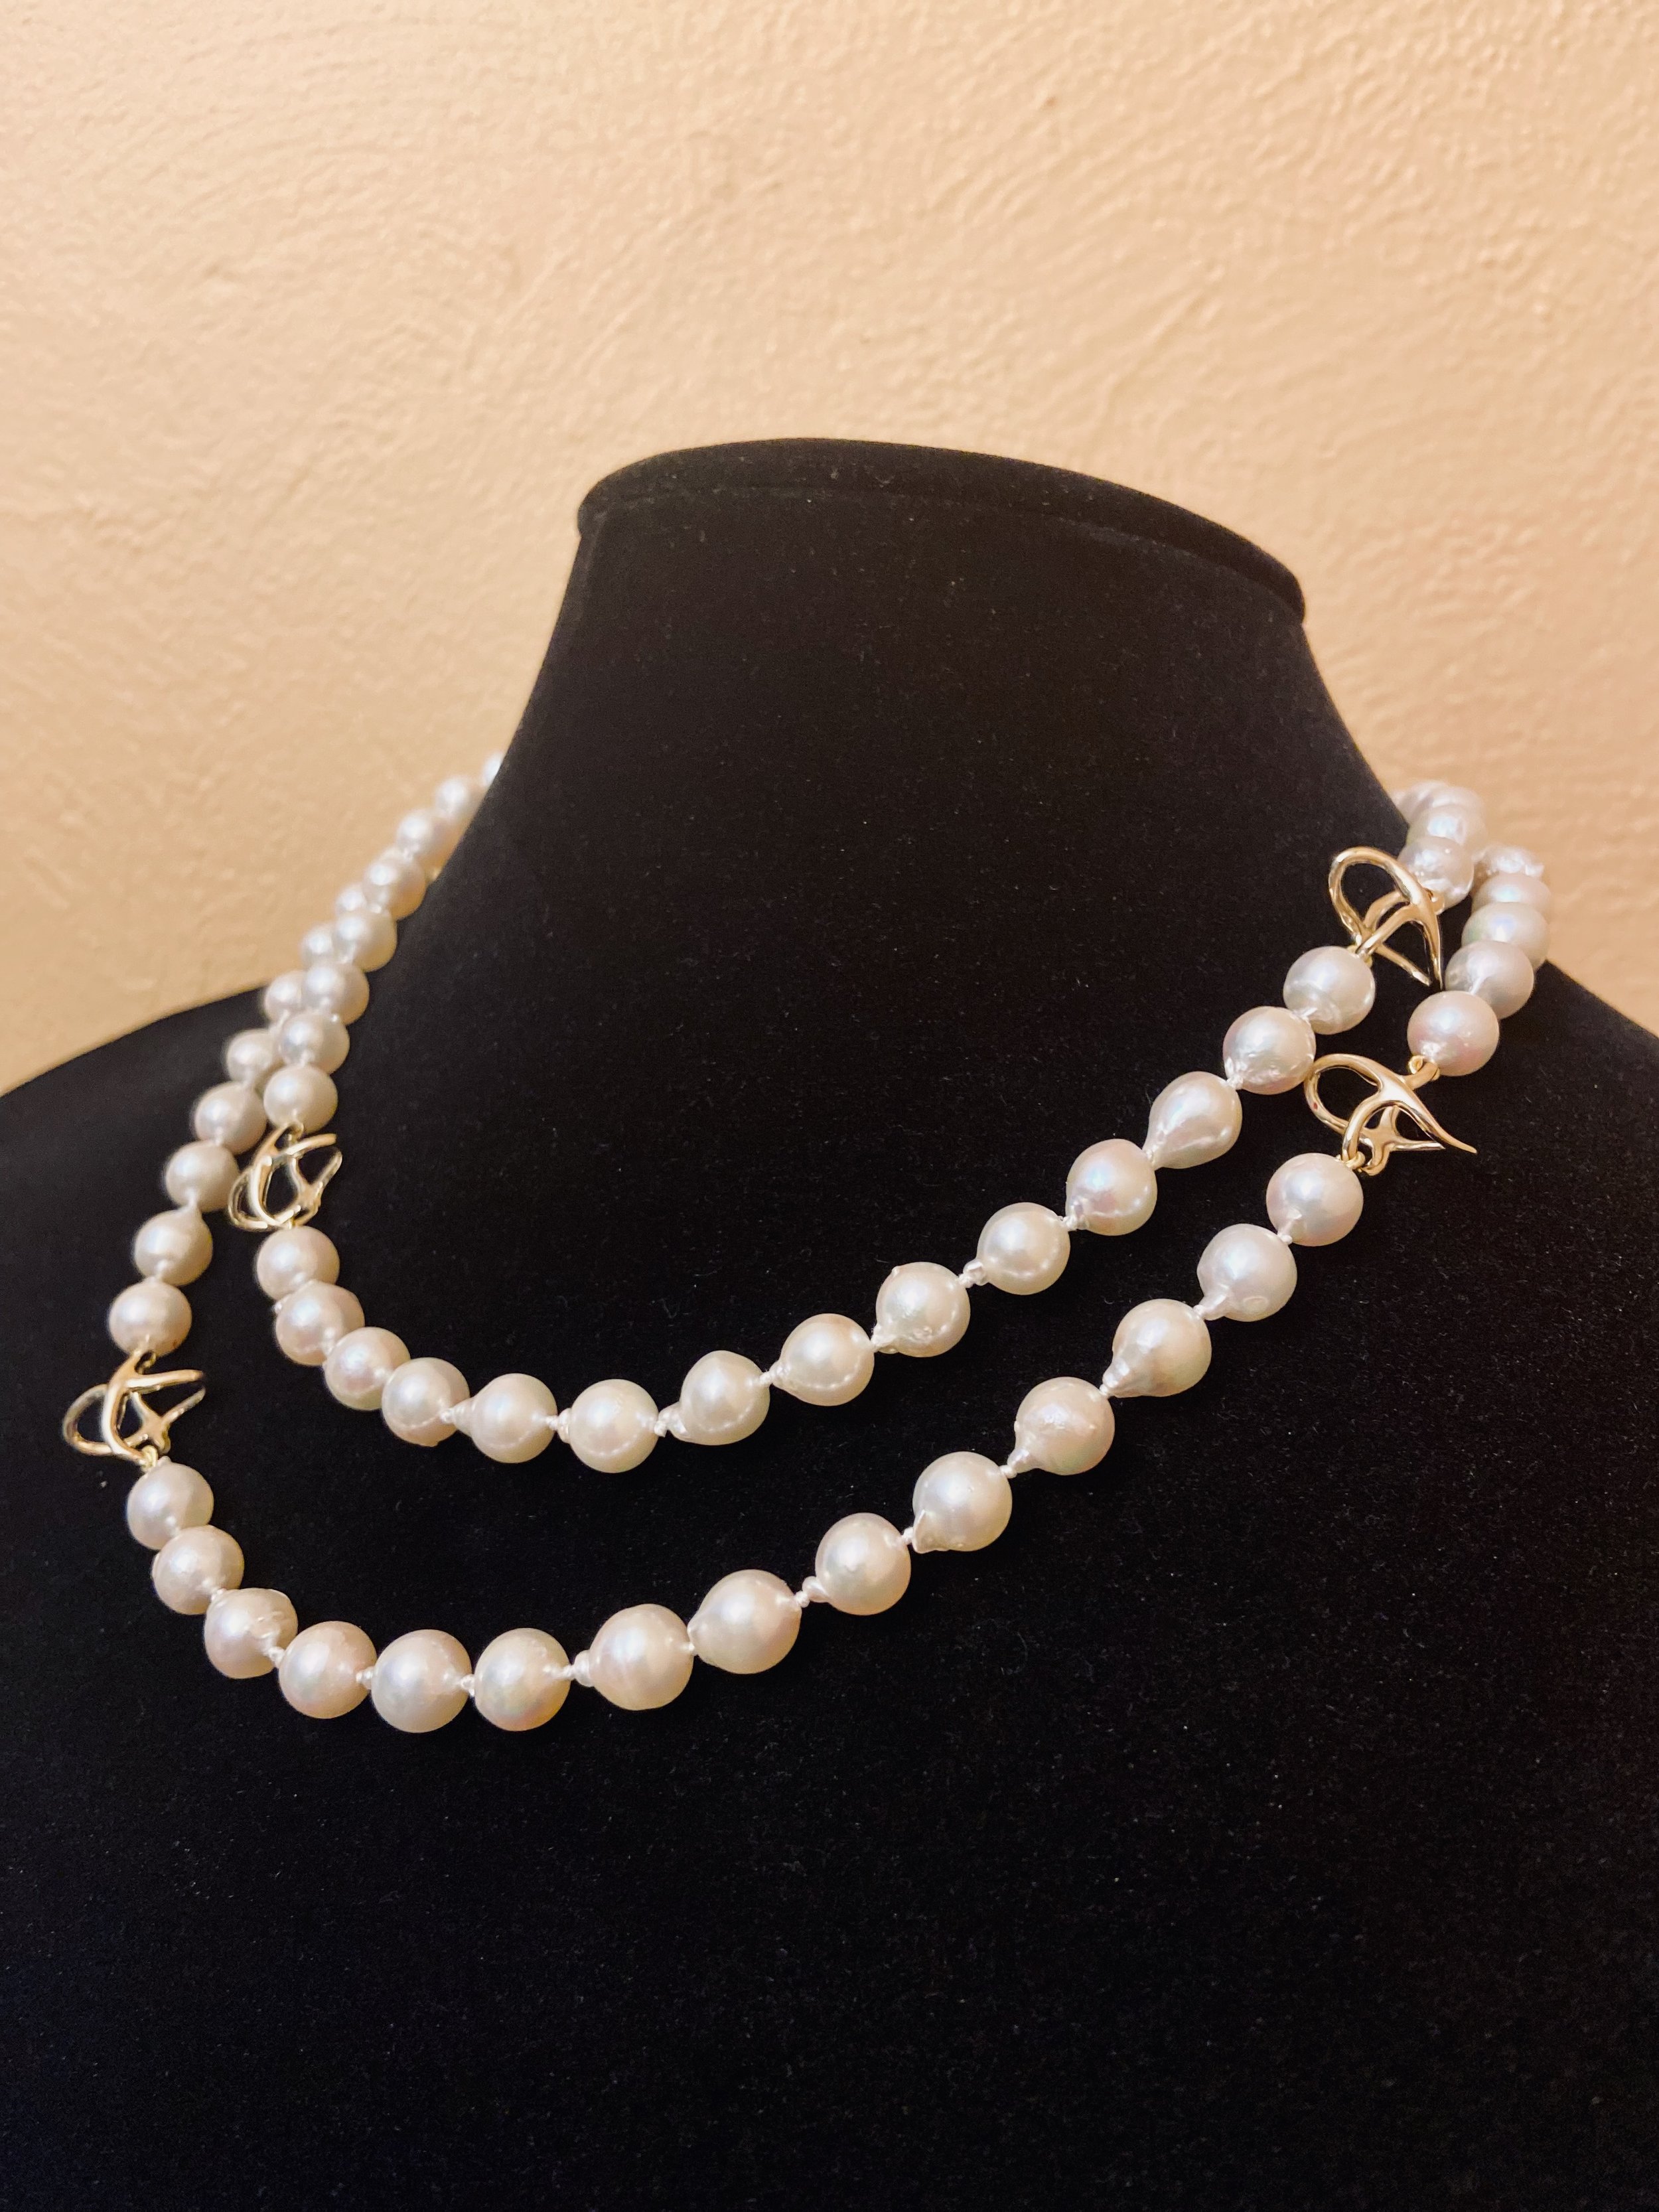 White baroque pearls with handmade 14k stations